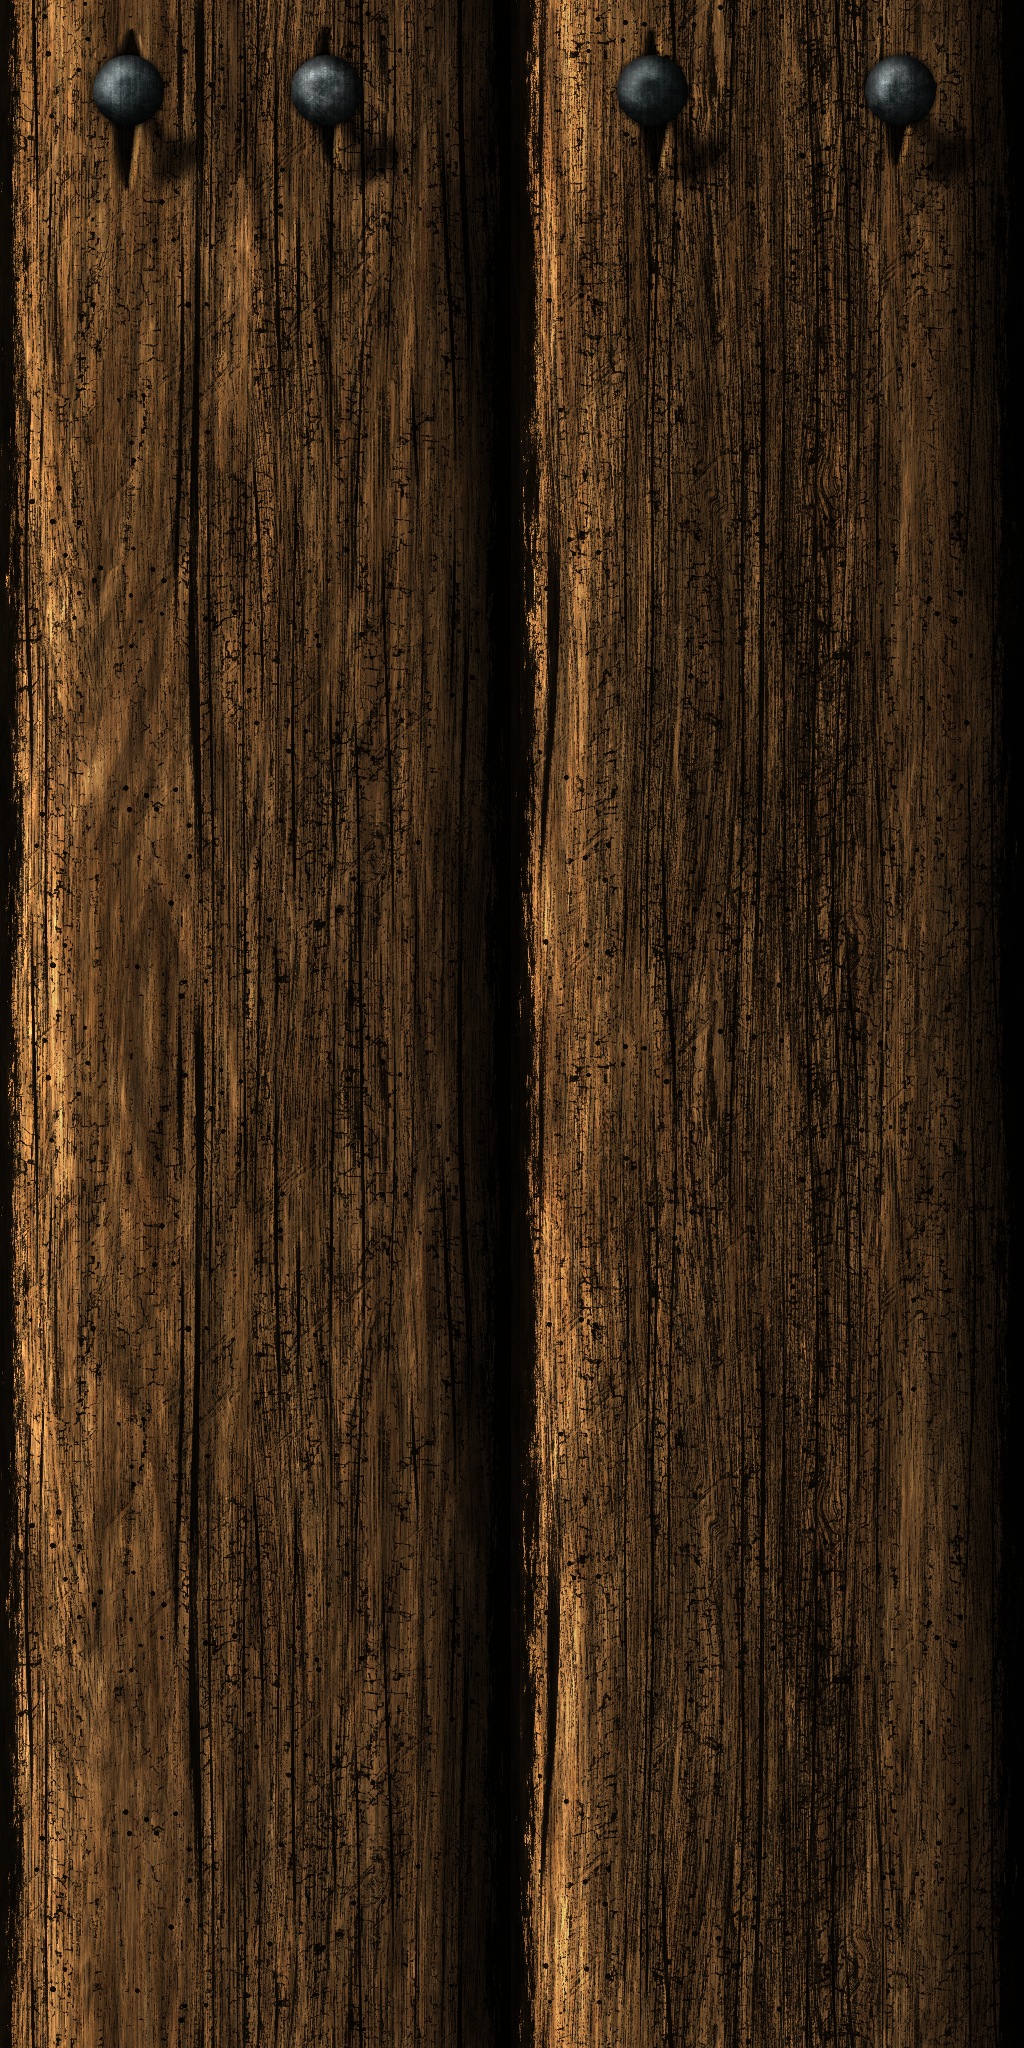 wood8_by_hoover1979-dbv3bhl.png